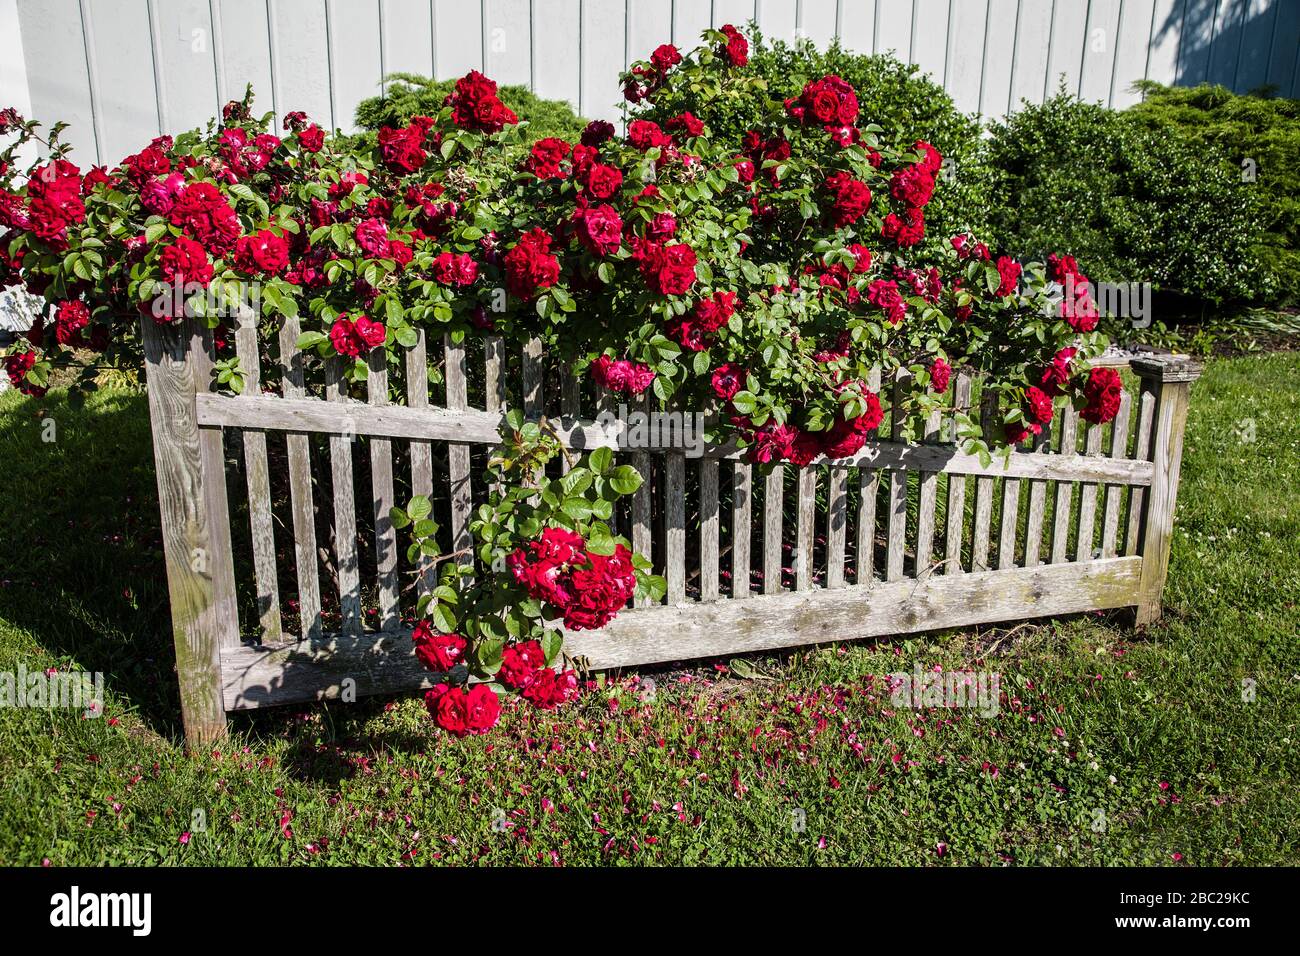 Red rose bushes on a wooden picket fence in Cape May, New Jersey, USA Stock Photo